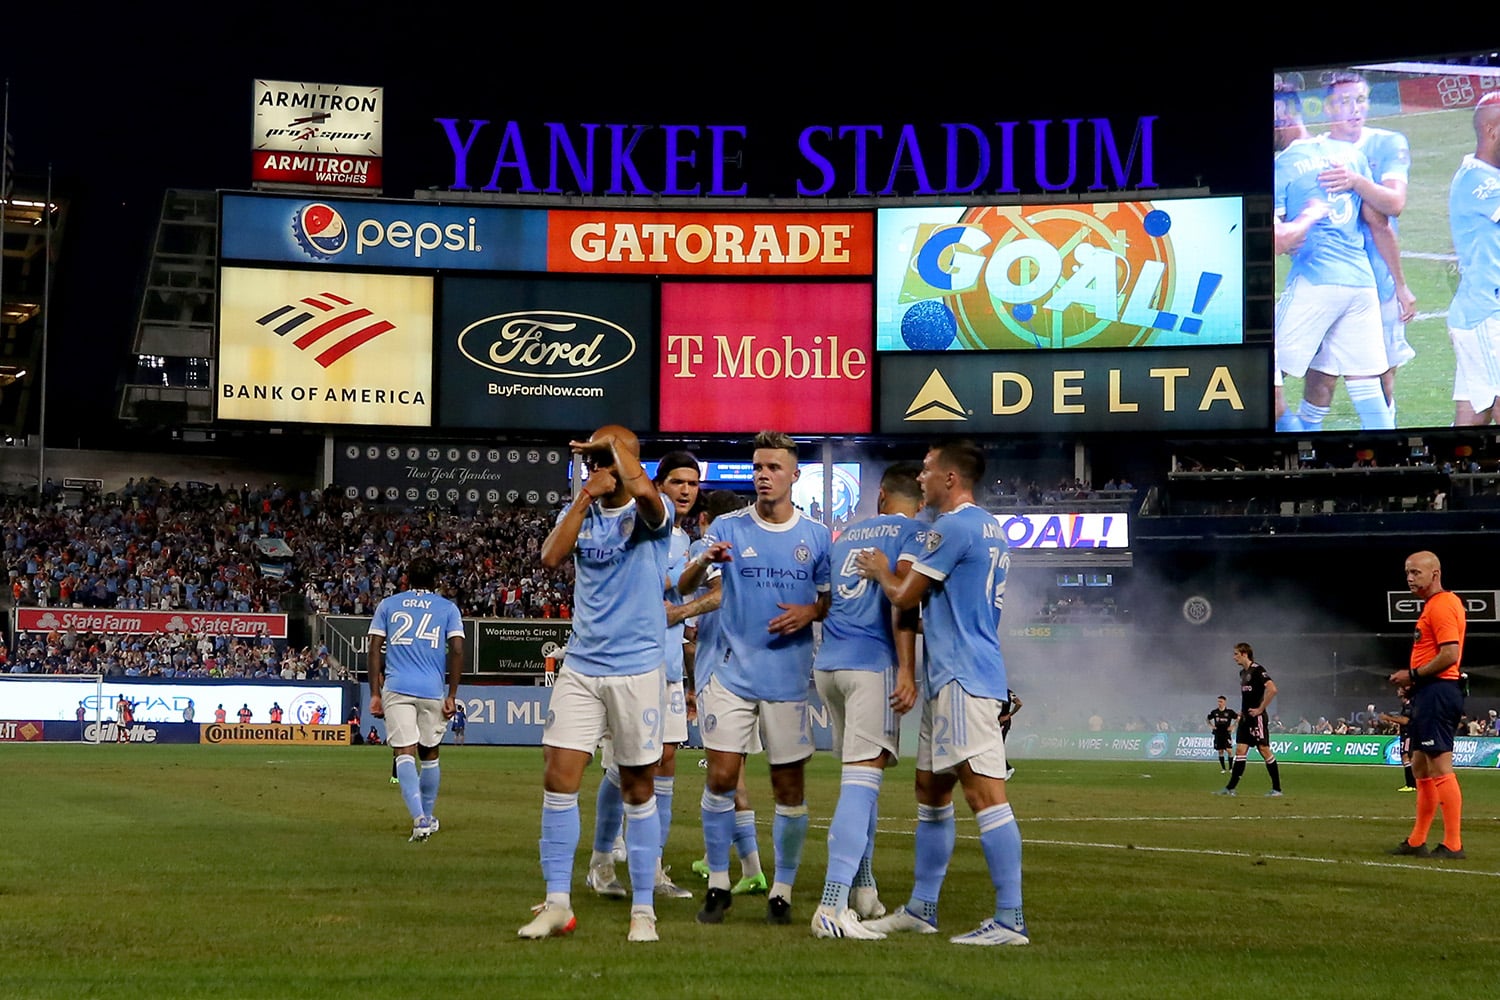 NYCFC players celebrate scoring a goal while playing in Yankees Stadium